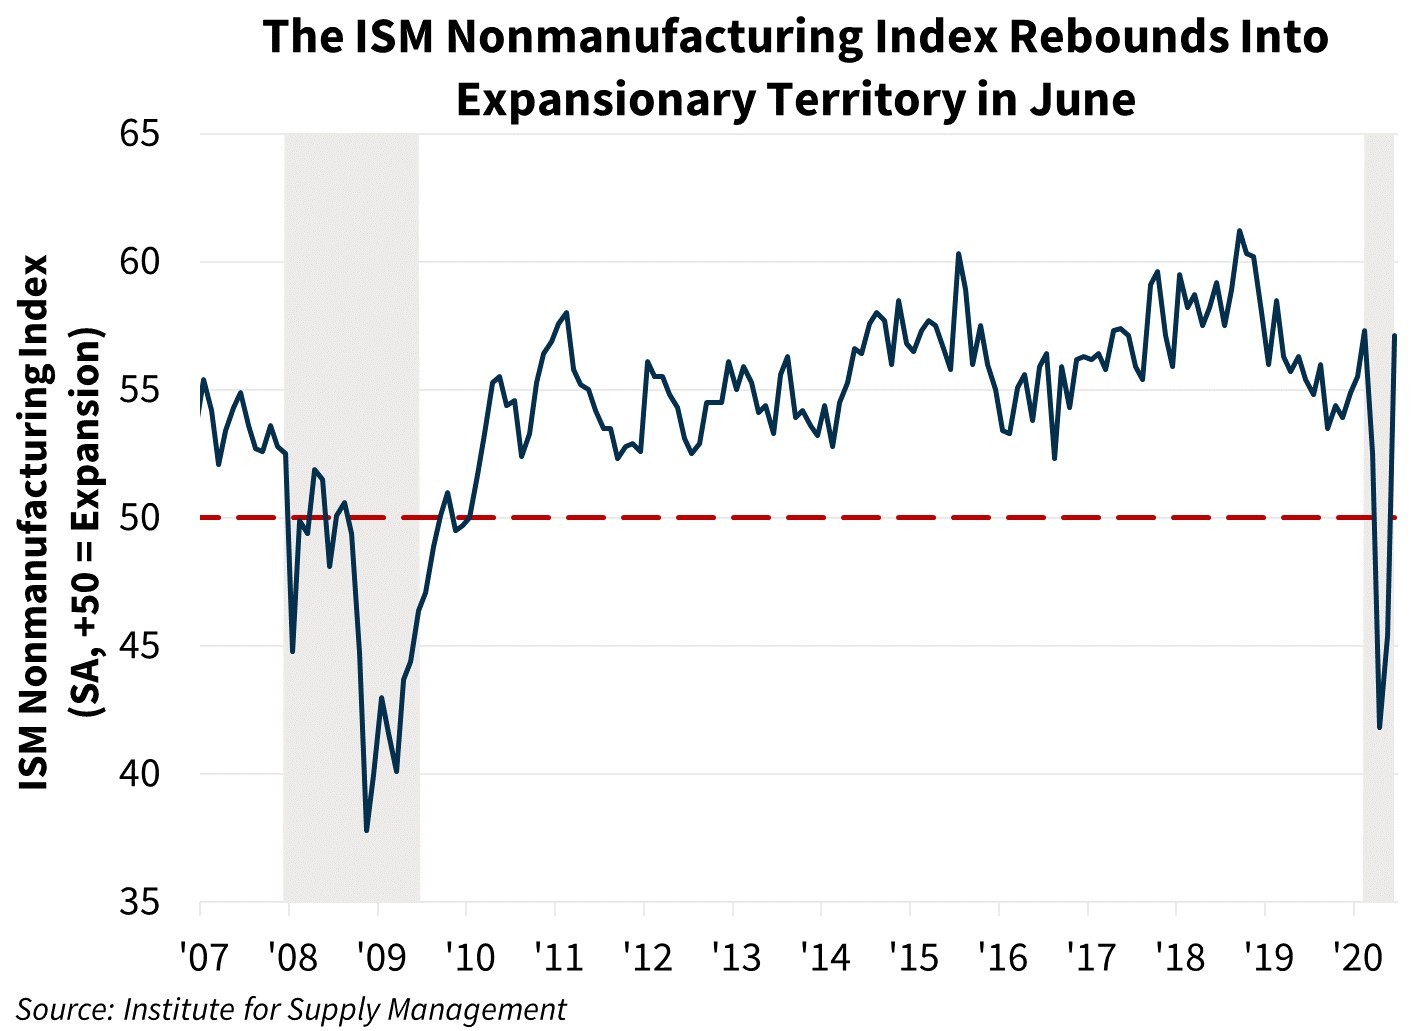  The ISM Nonmanufacturing Index Rebounds Into Expansionary Territory in June 